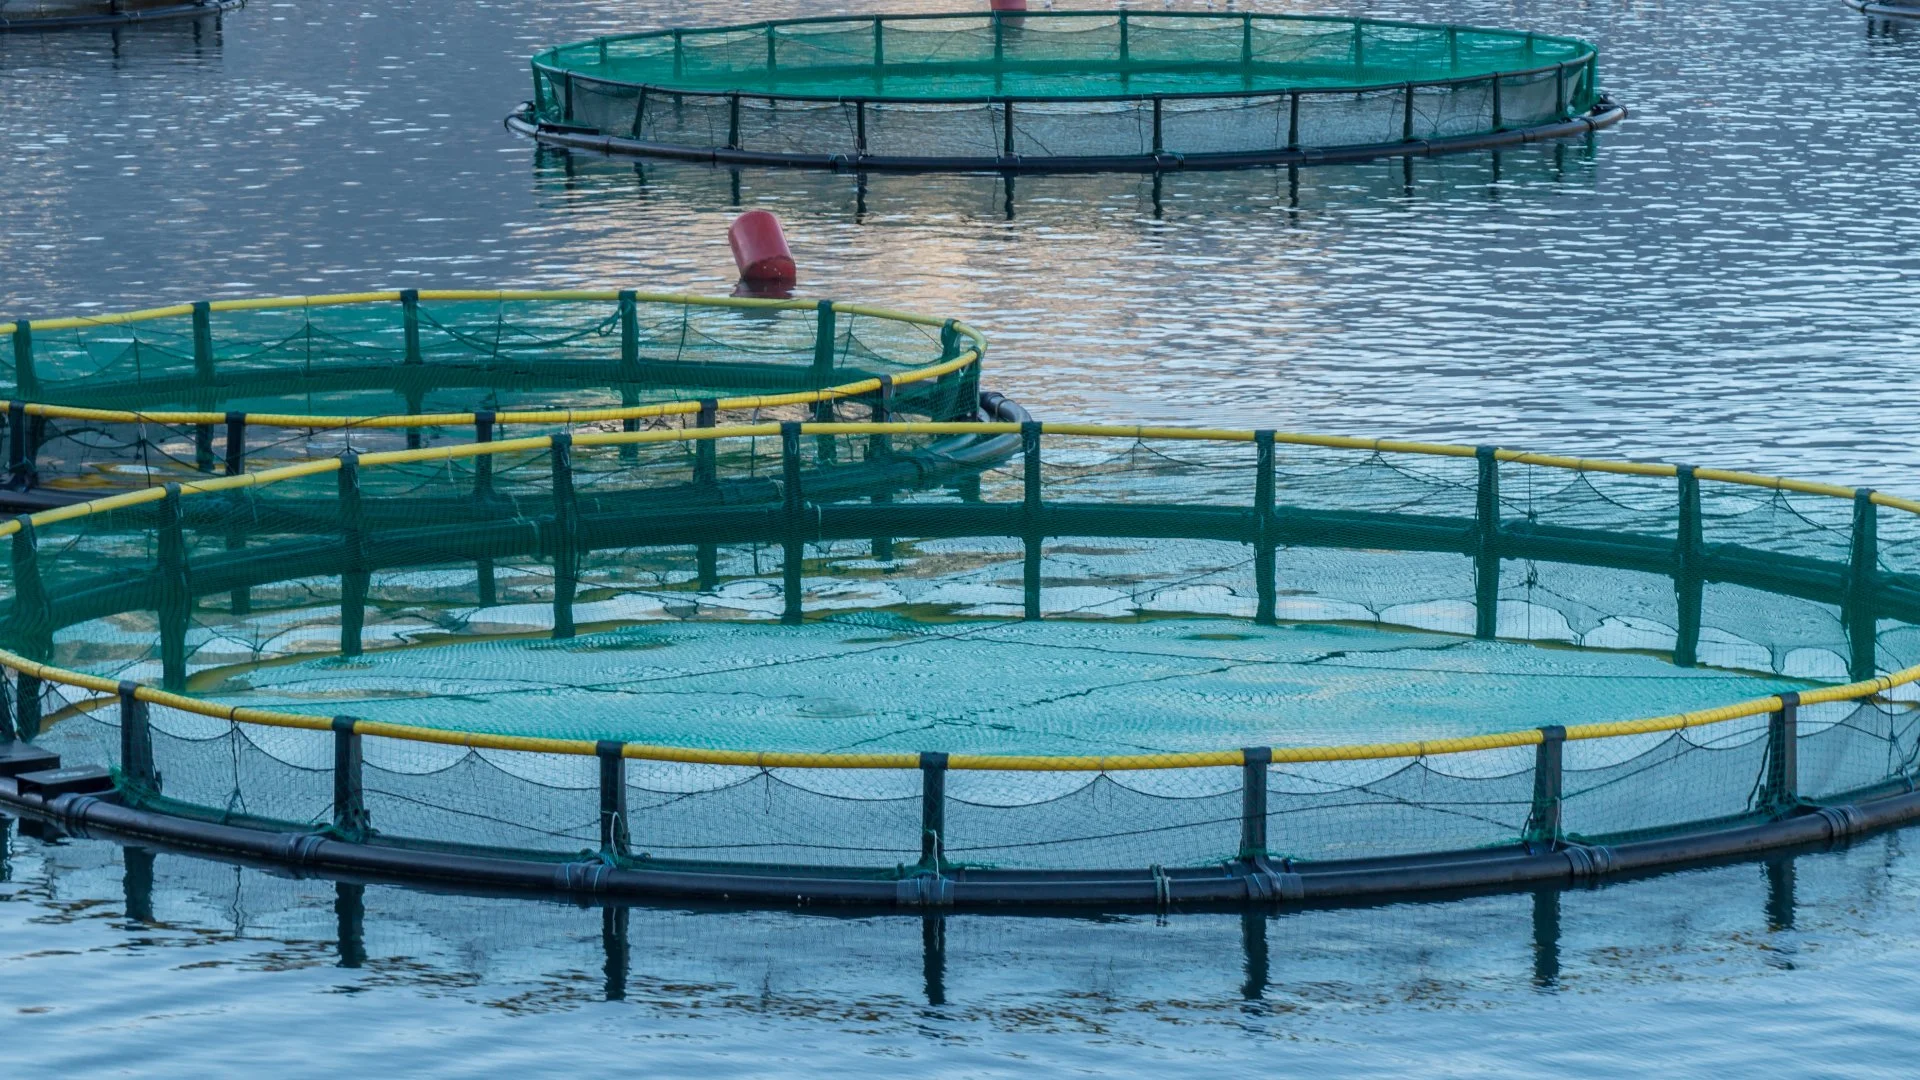 3 Technologies Your Aquaculture Irrigation System Should Be Equipped With